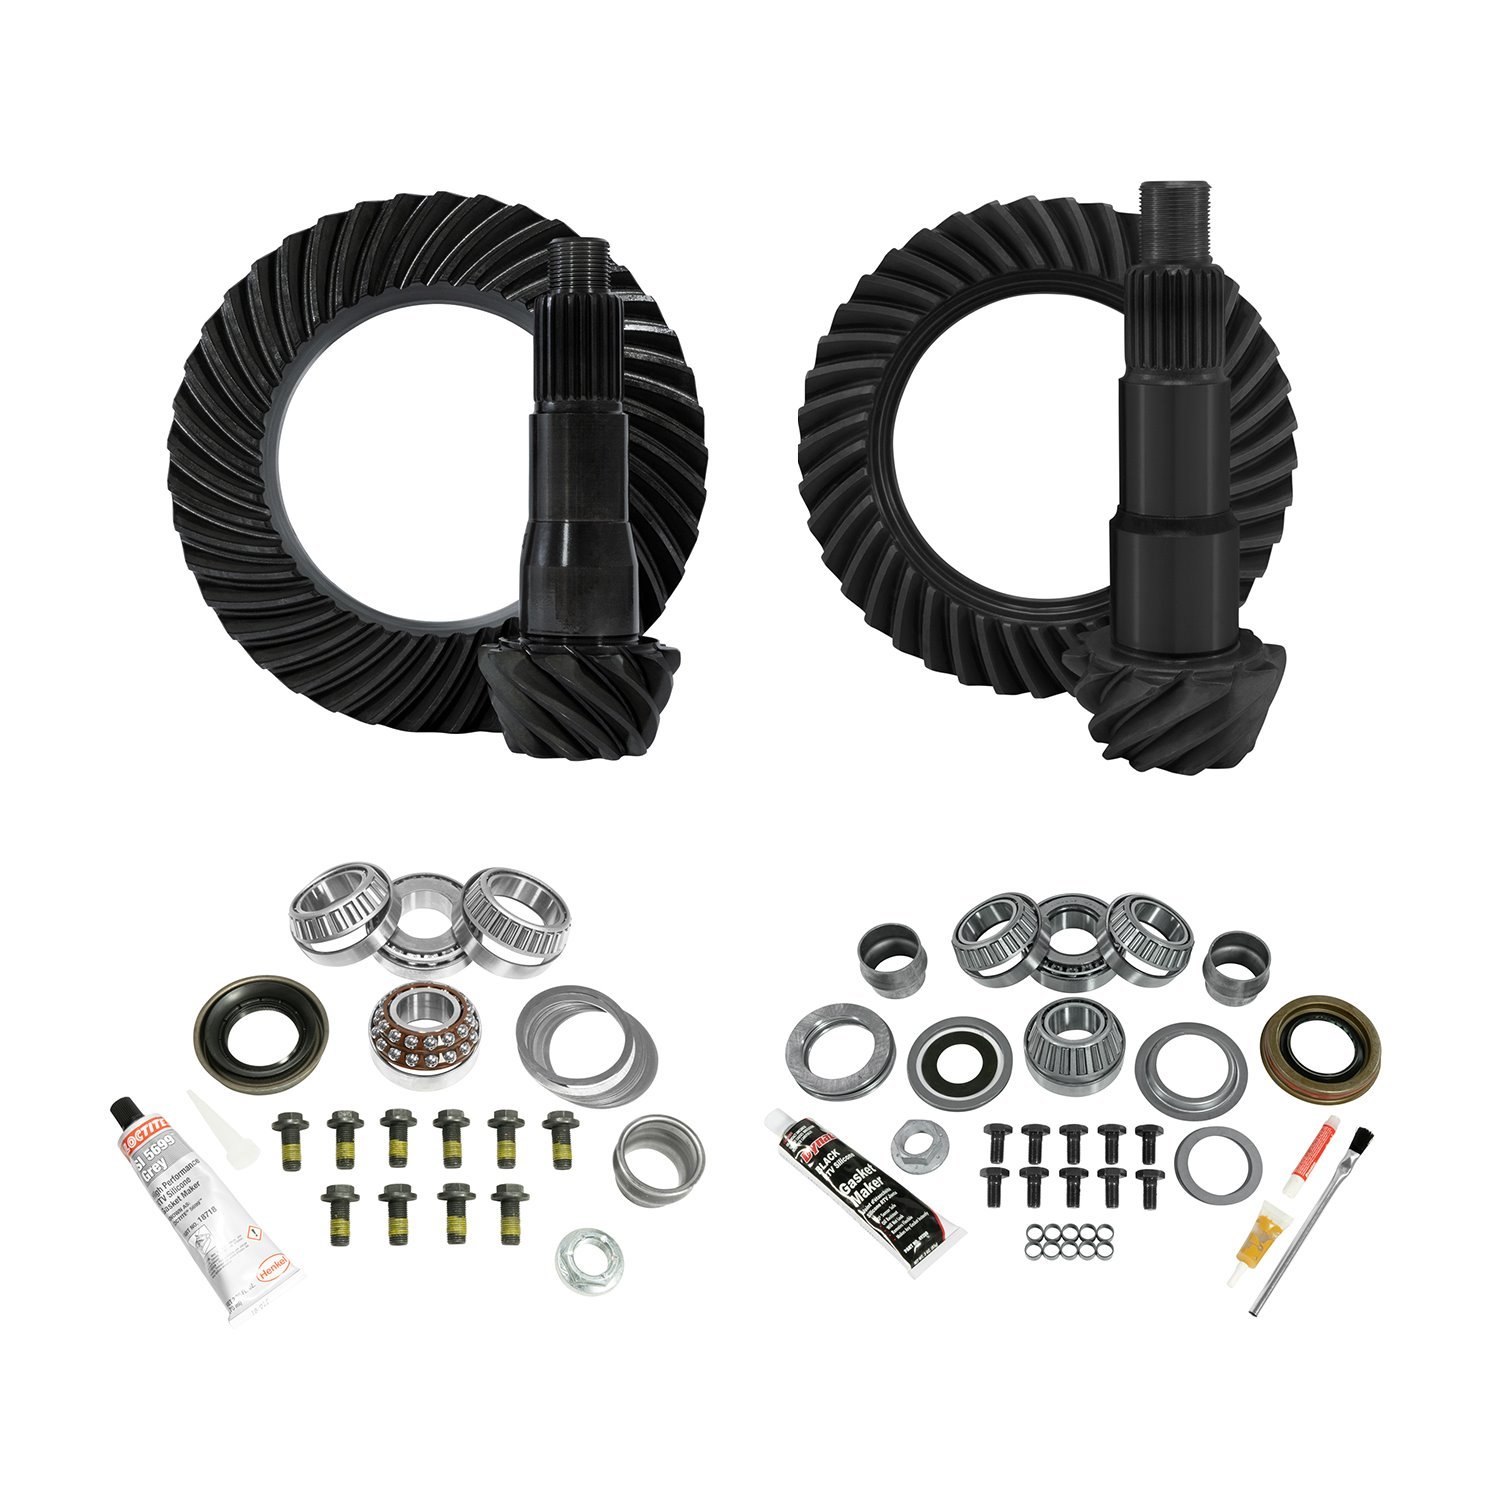 Re-Gear And Install Kit, D30 Front/D35 Rear, Jeep Jl Non-Rubicon, 5.13